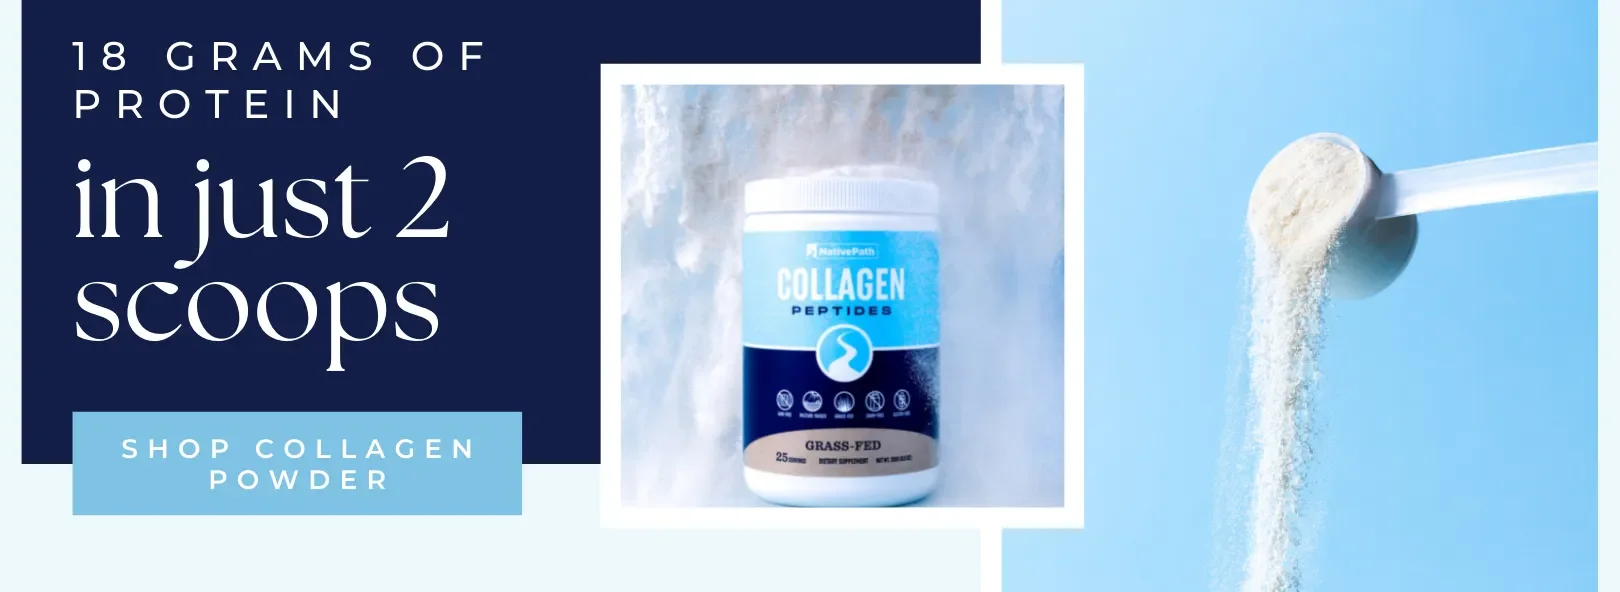 18 Grams of Protein in Just 2 Scoops of NativePath Collagen Powder